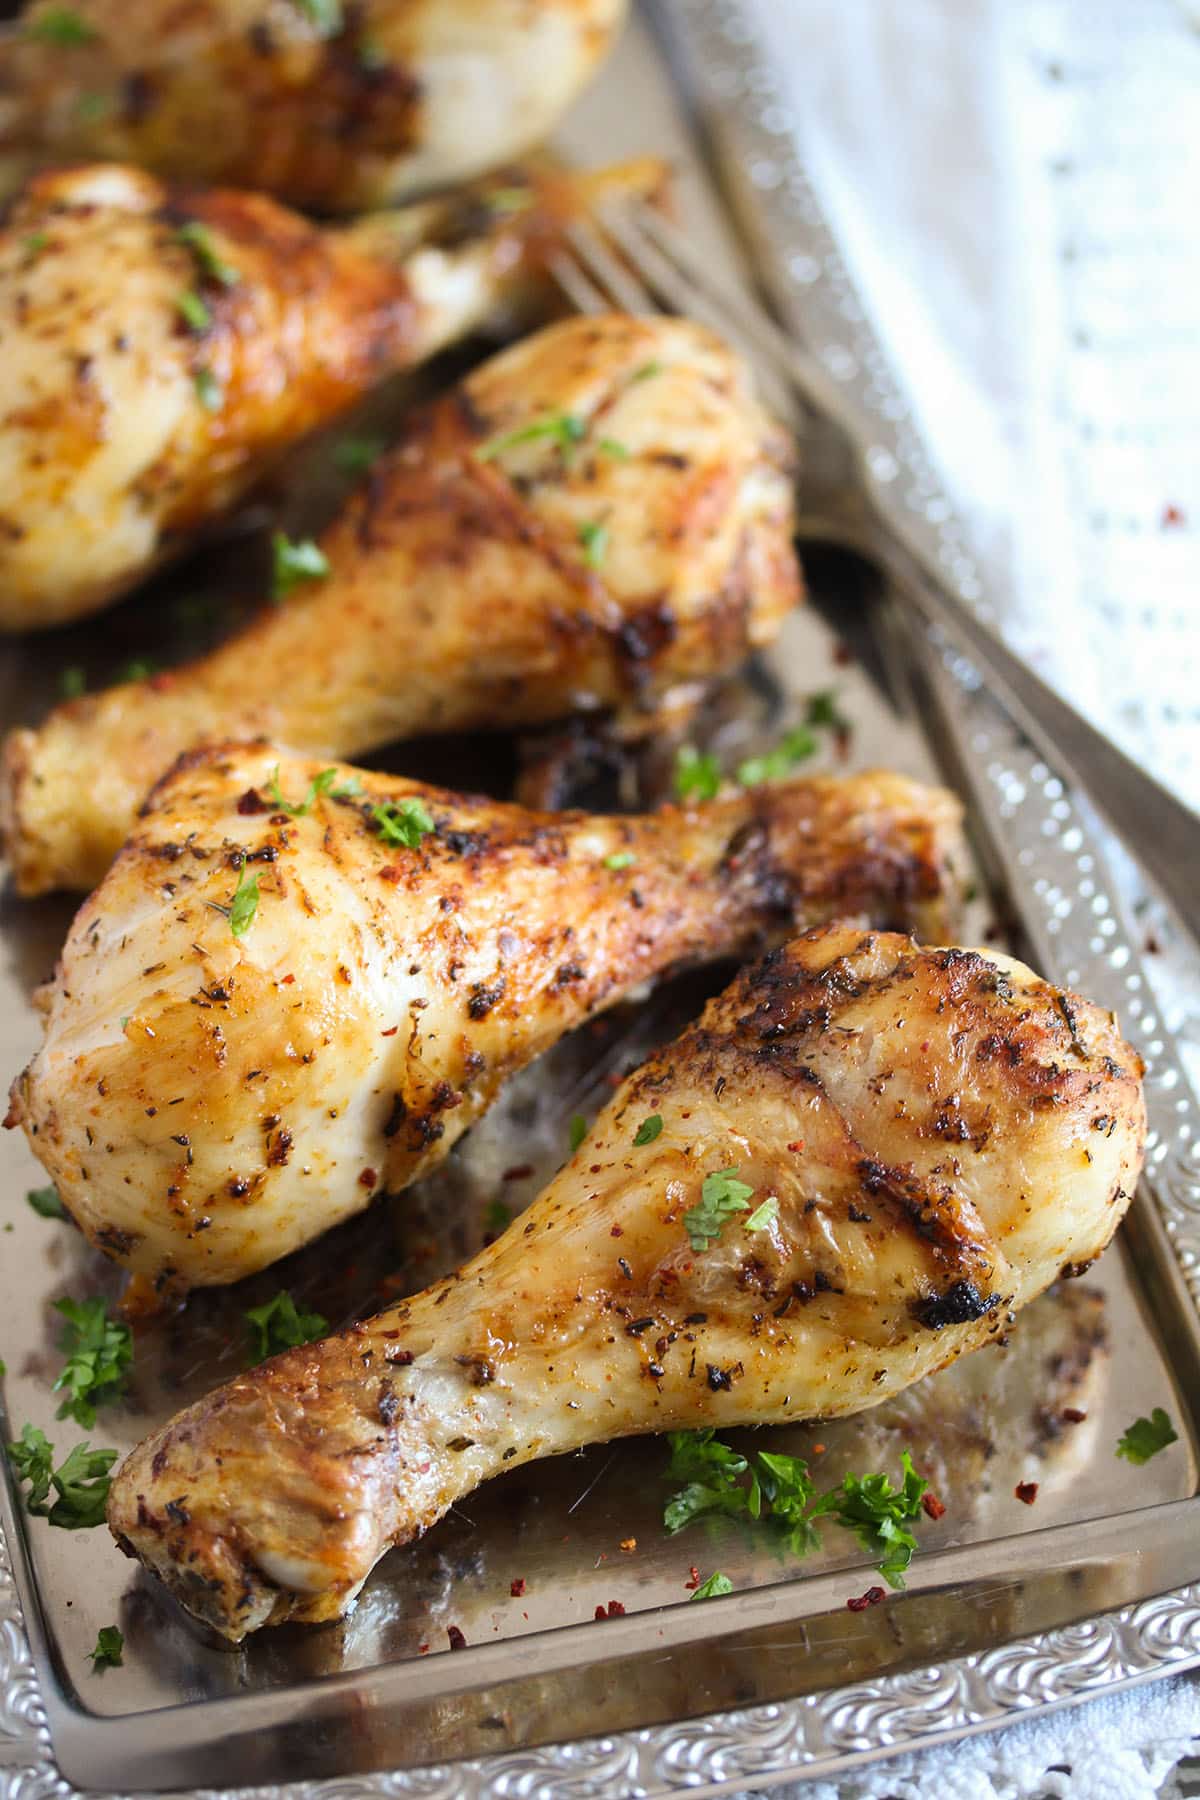 four golden brown chicken legs sprinkled with parsley.